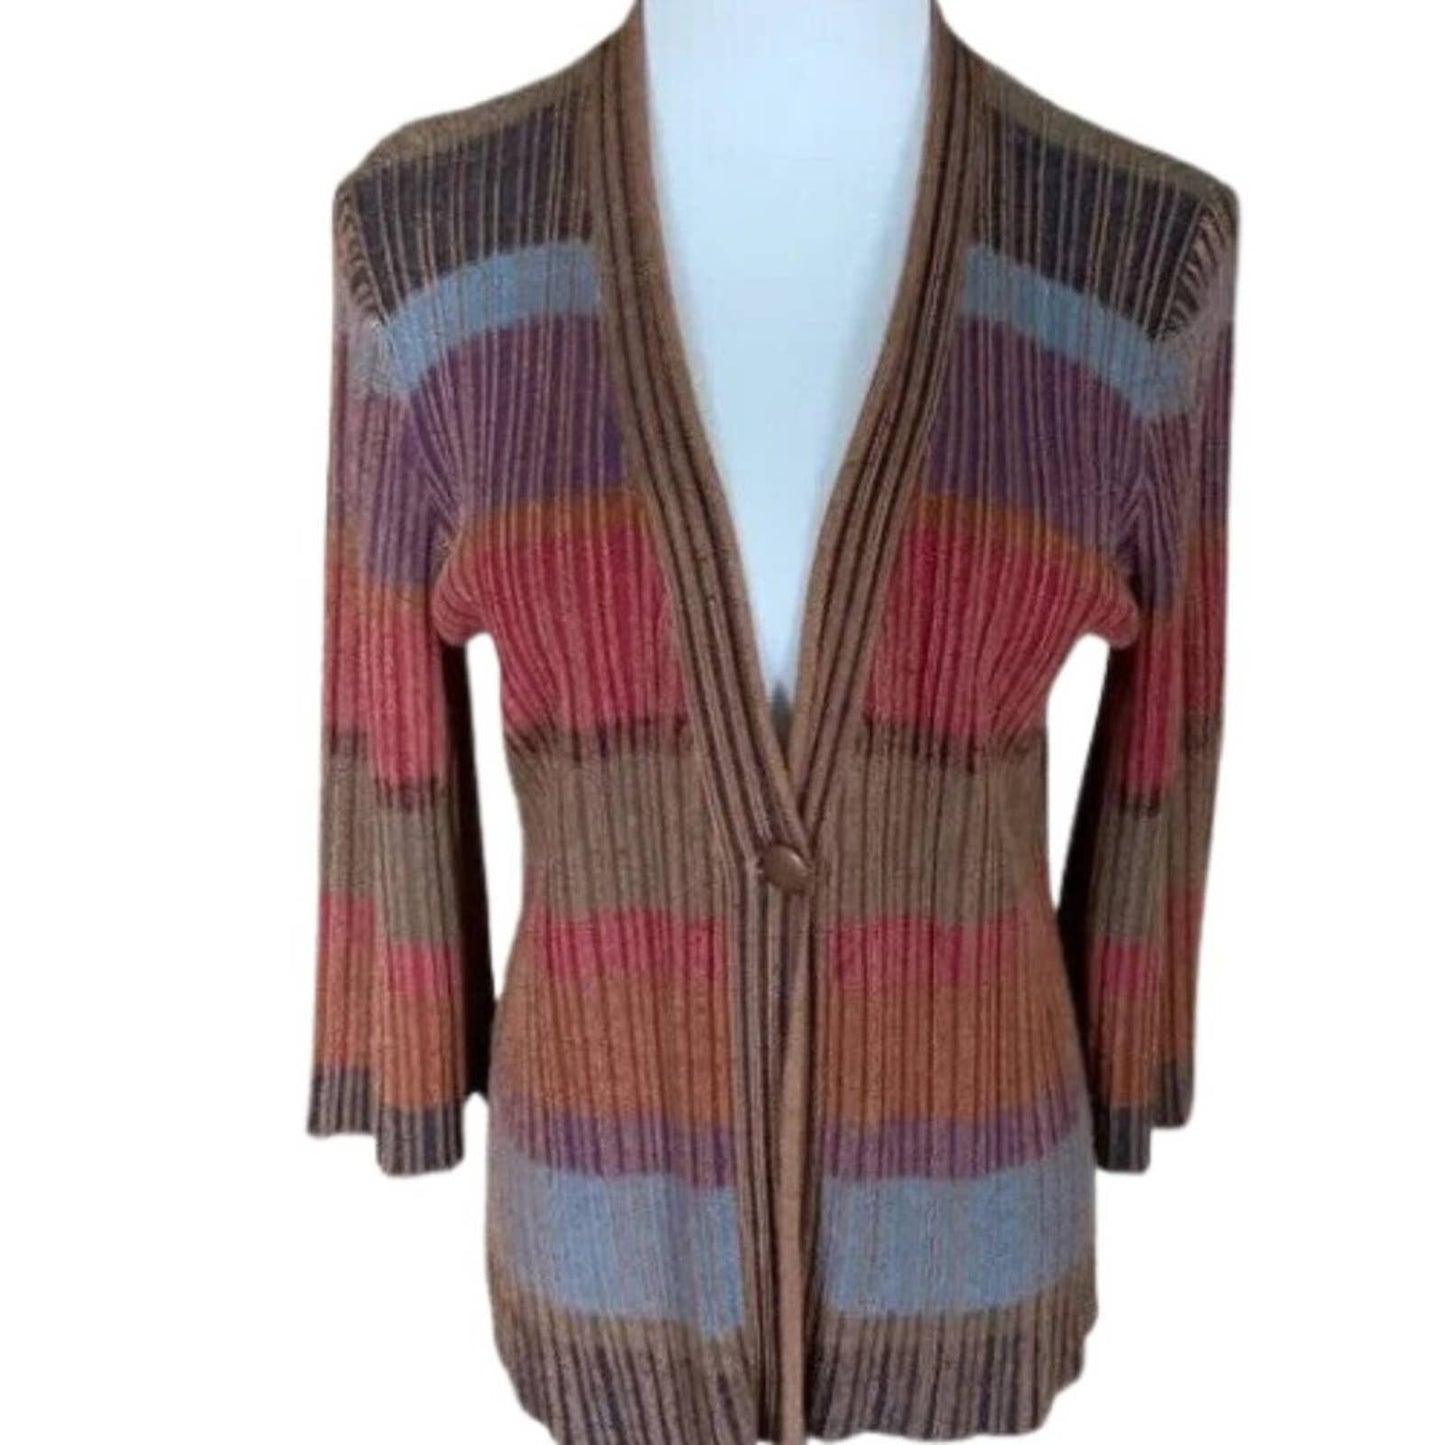 Coldwater Creek Ribbed Copper Cardigan NWT Size Medium